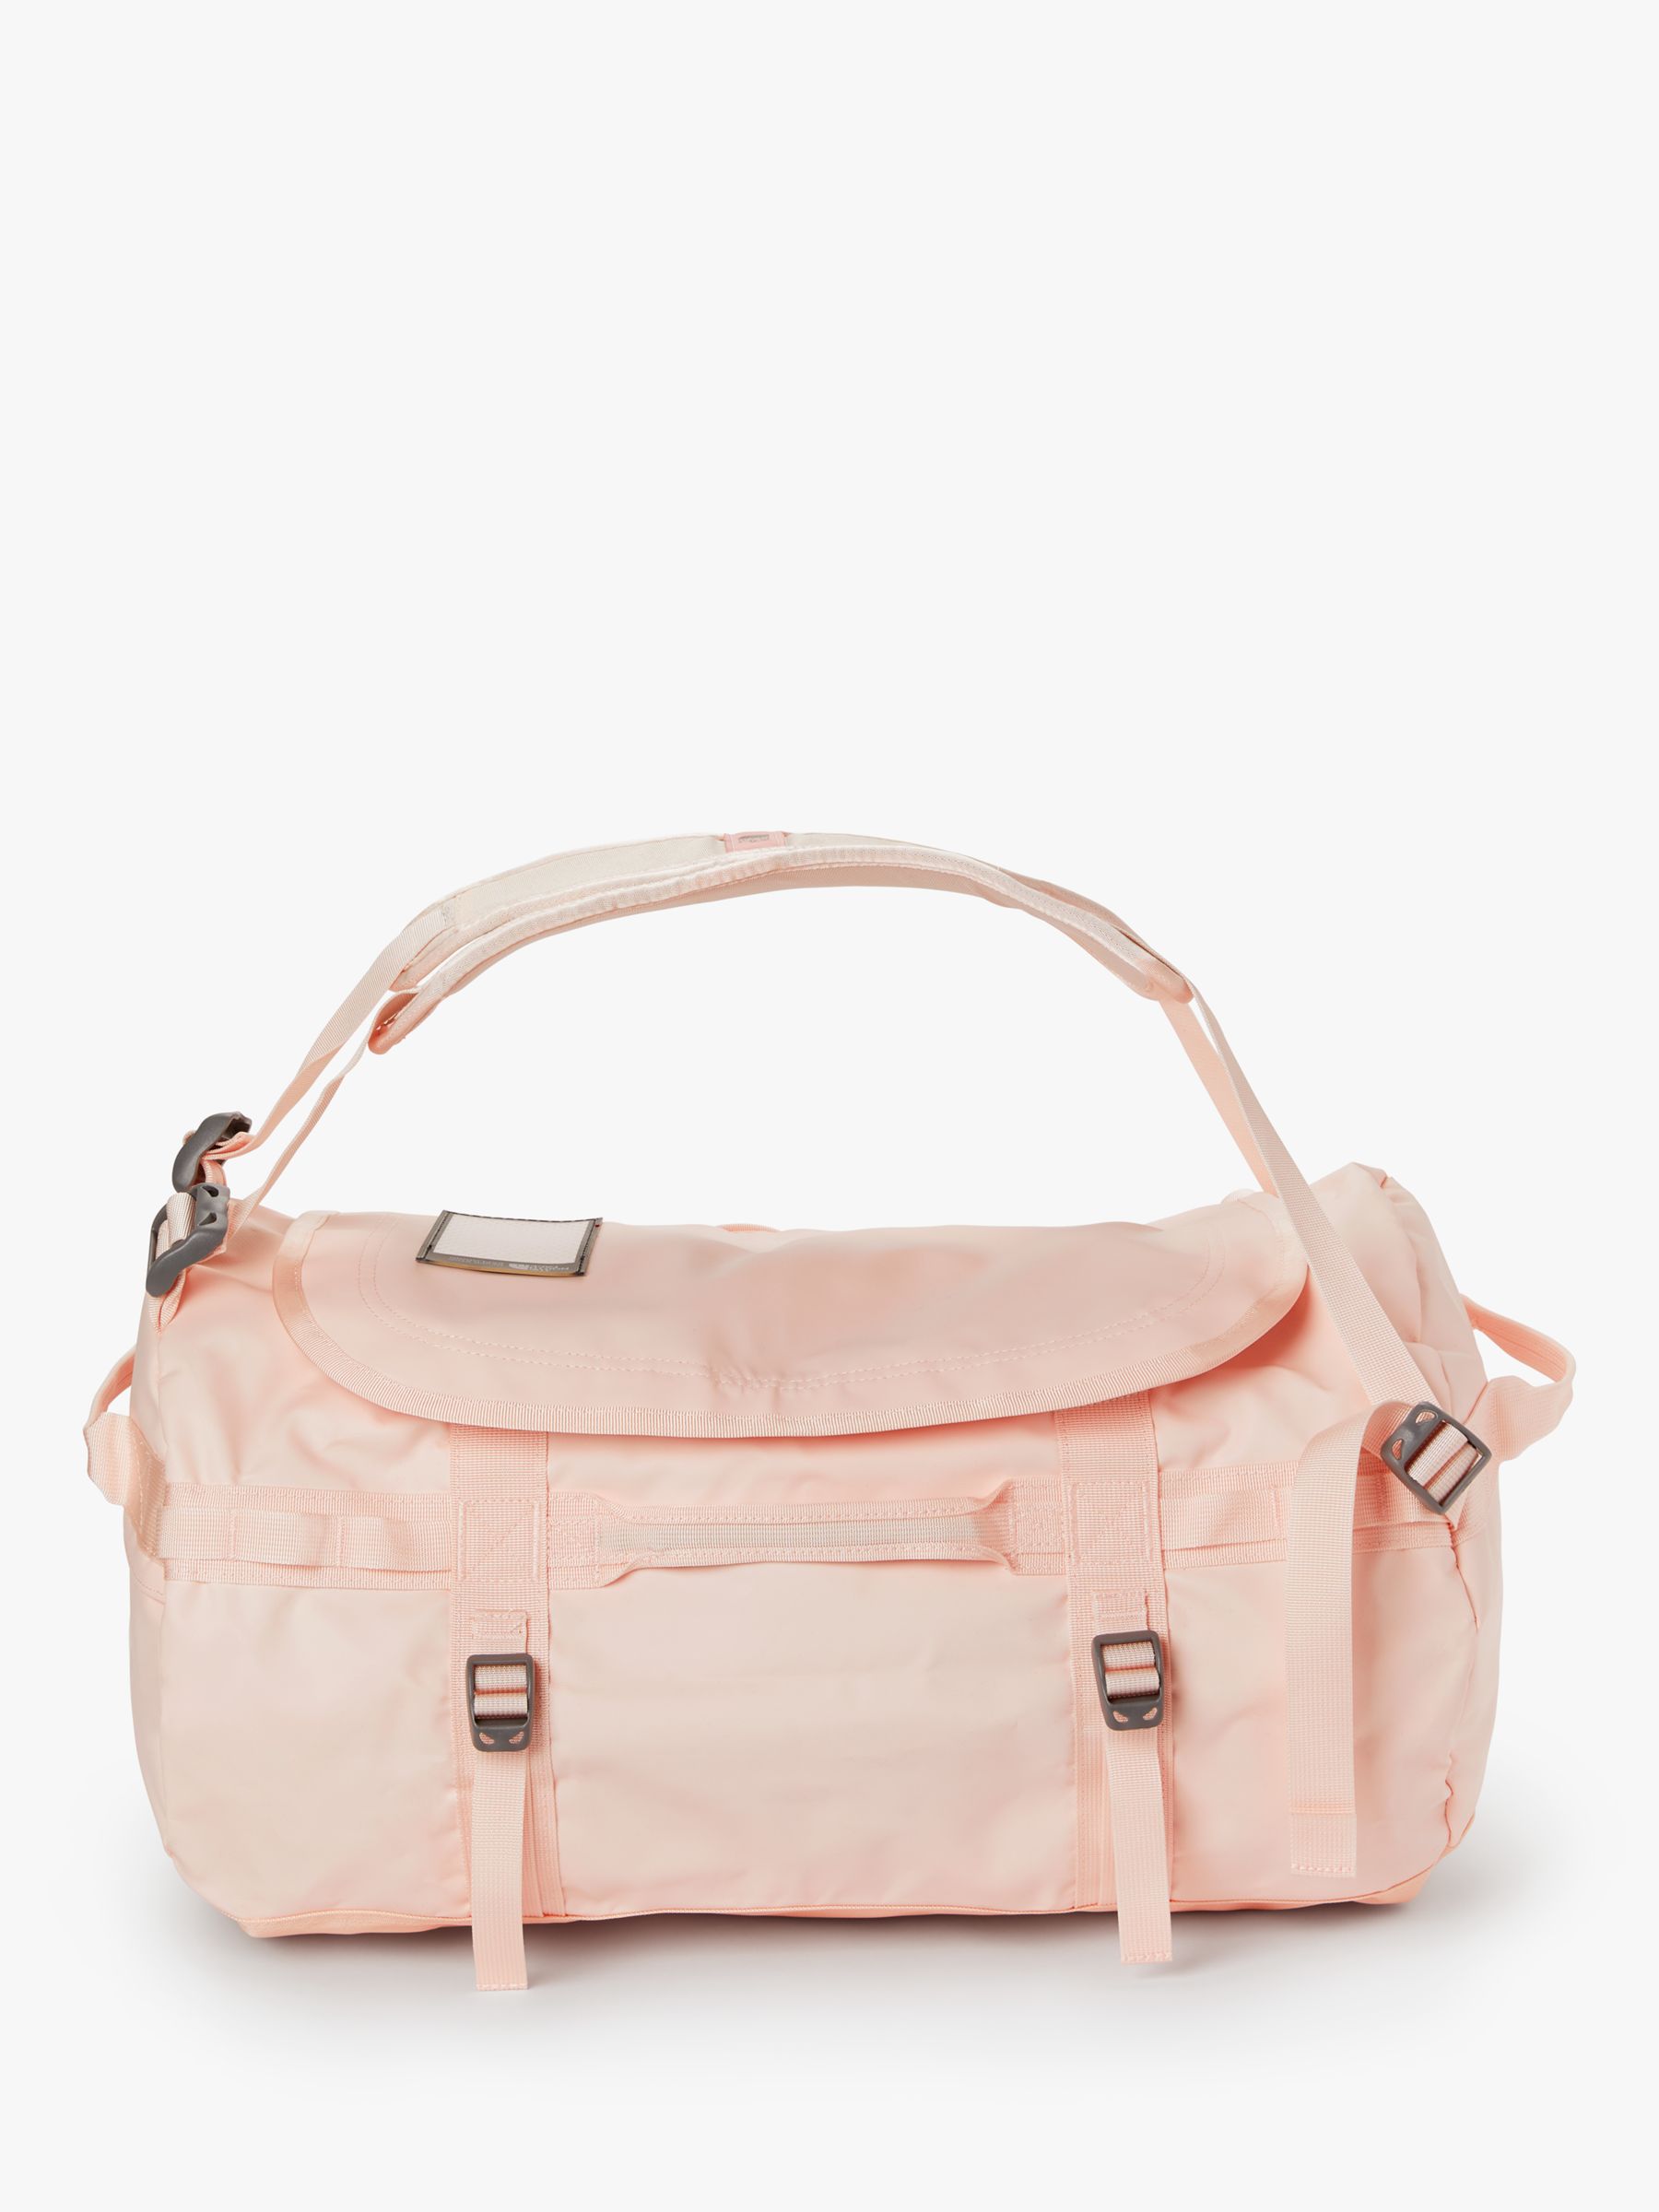 the north face duffel pink